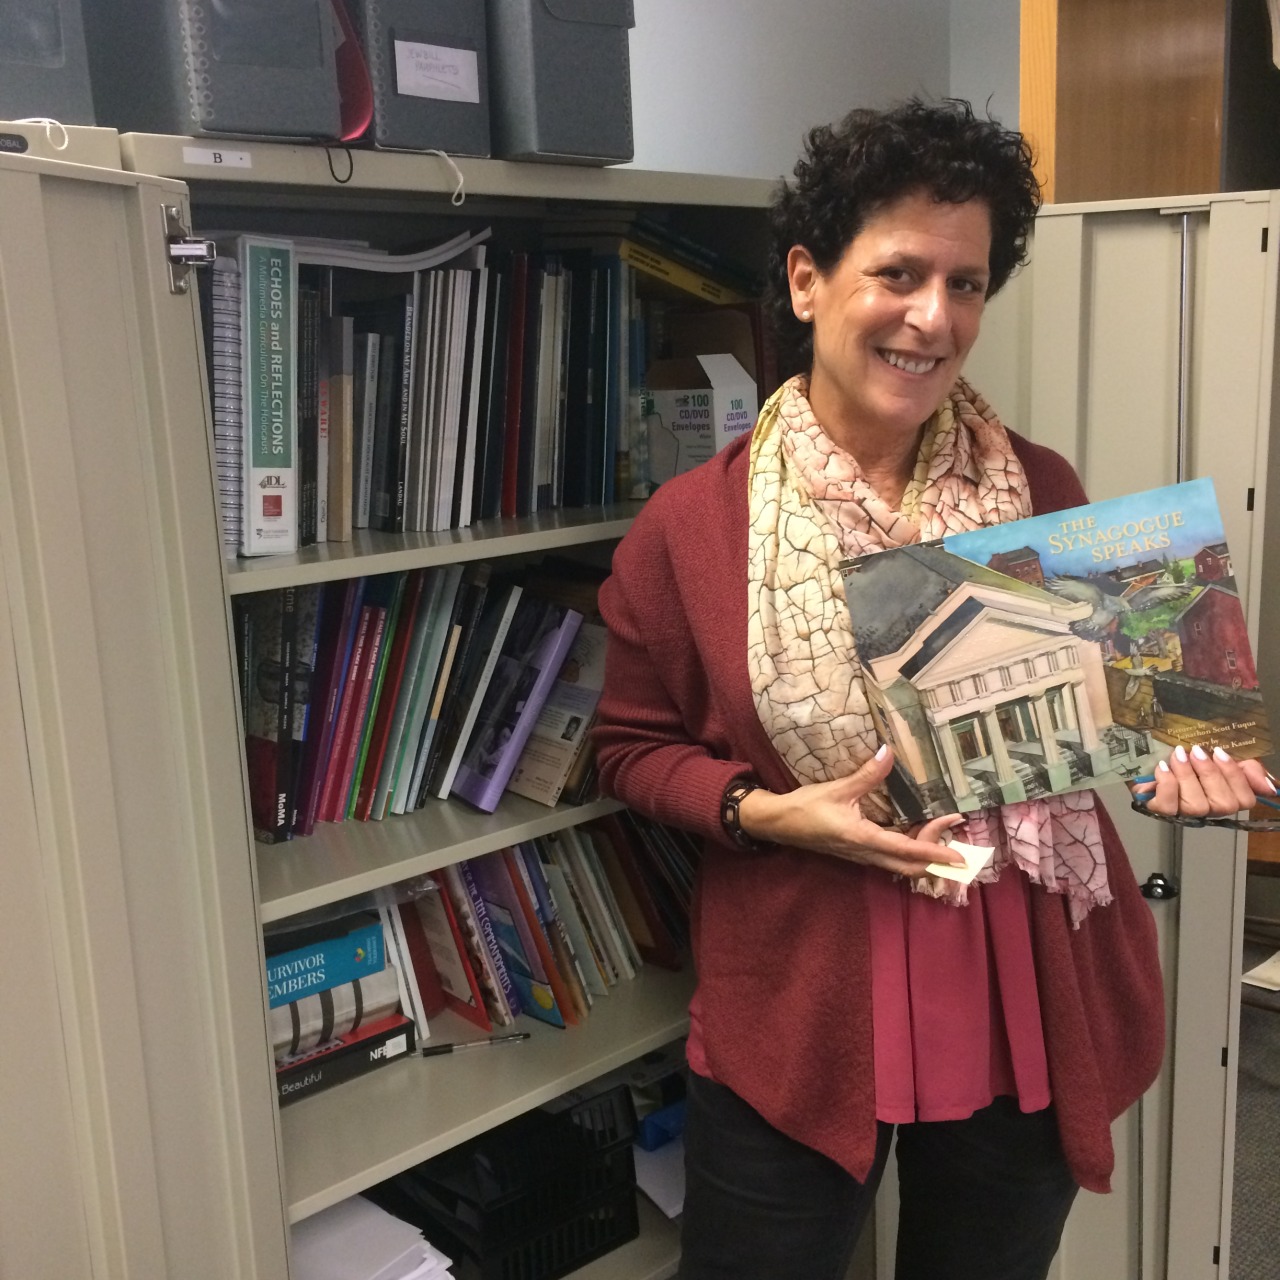 jewishmuseummd:
“  #DYK: Today is #LibraryShelfieDay? (The 4th Wednesday in January!)
Here’s a peek at our education library shelves, with our Director of Learning and Visitor Experience Ilene to show off our braille copy of The Synagogue...